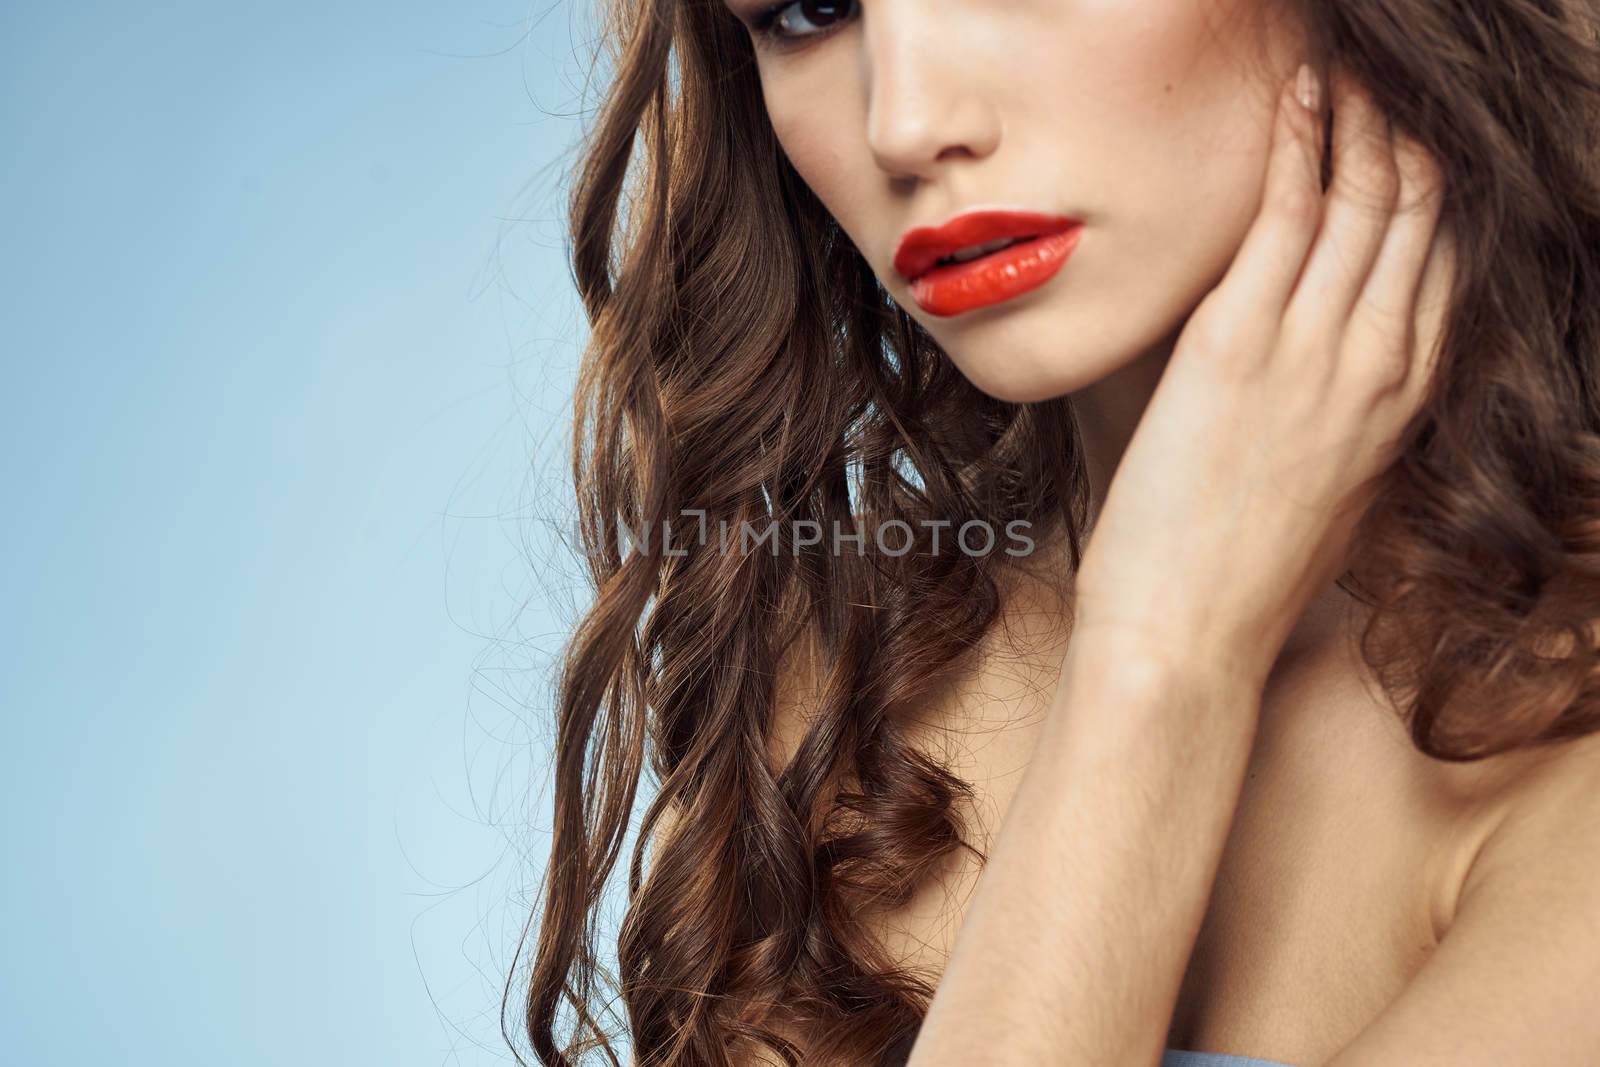 Beautiful woman naked shoulders hairstyle care bright makeup blue background by SHOTPRIME